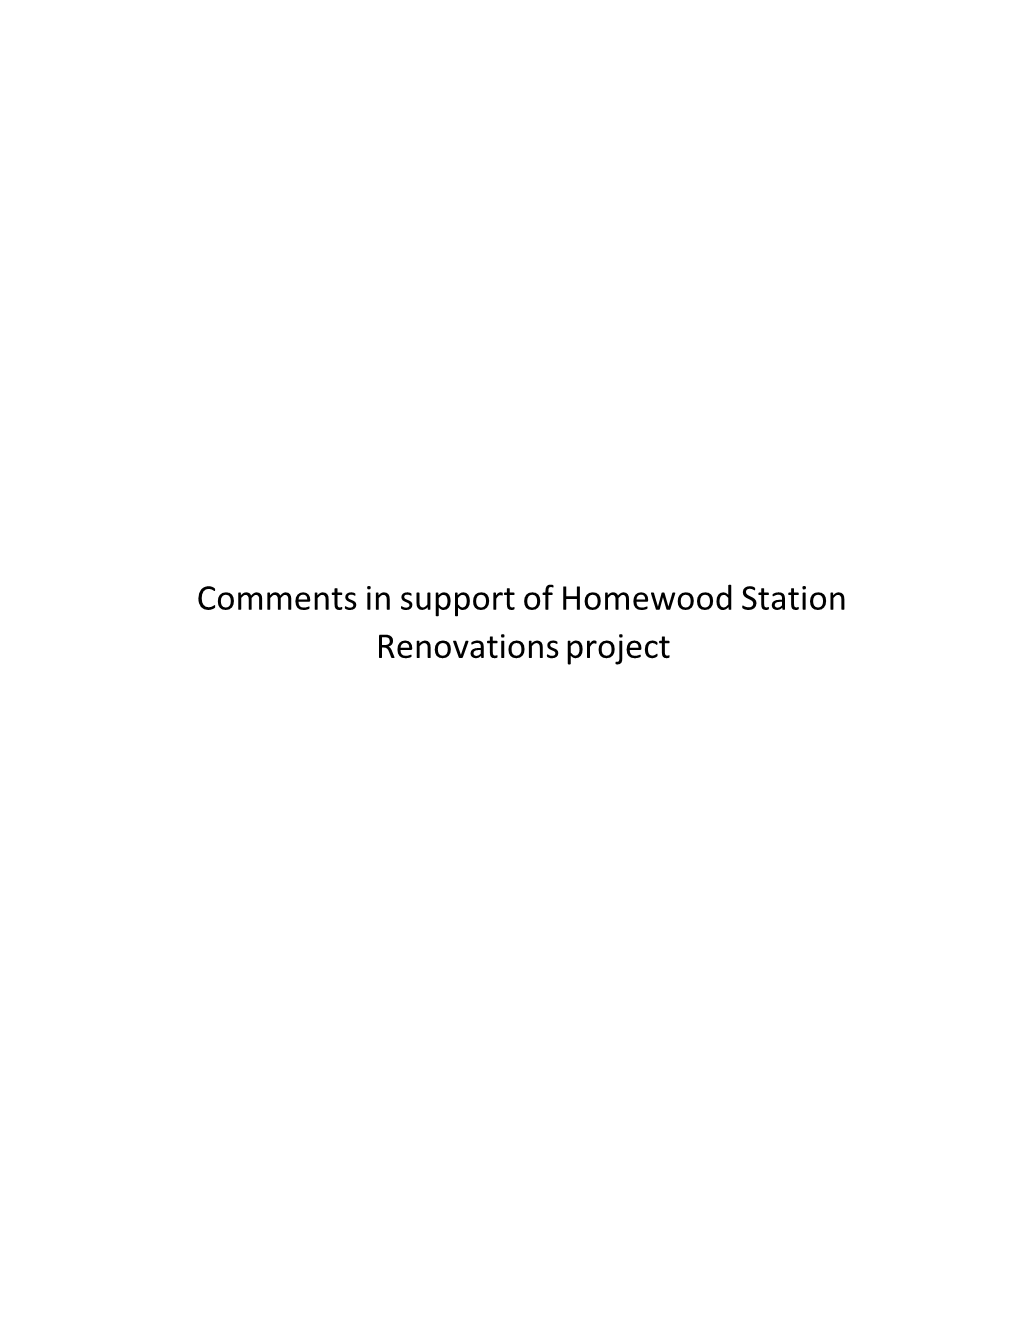 Comments in Support of Homewood Station Renovations Project